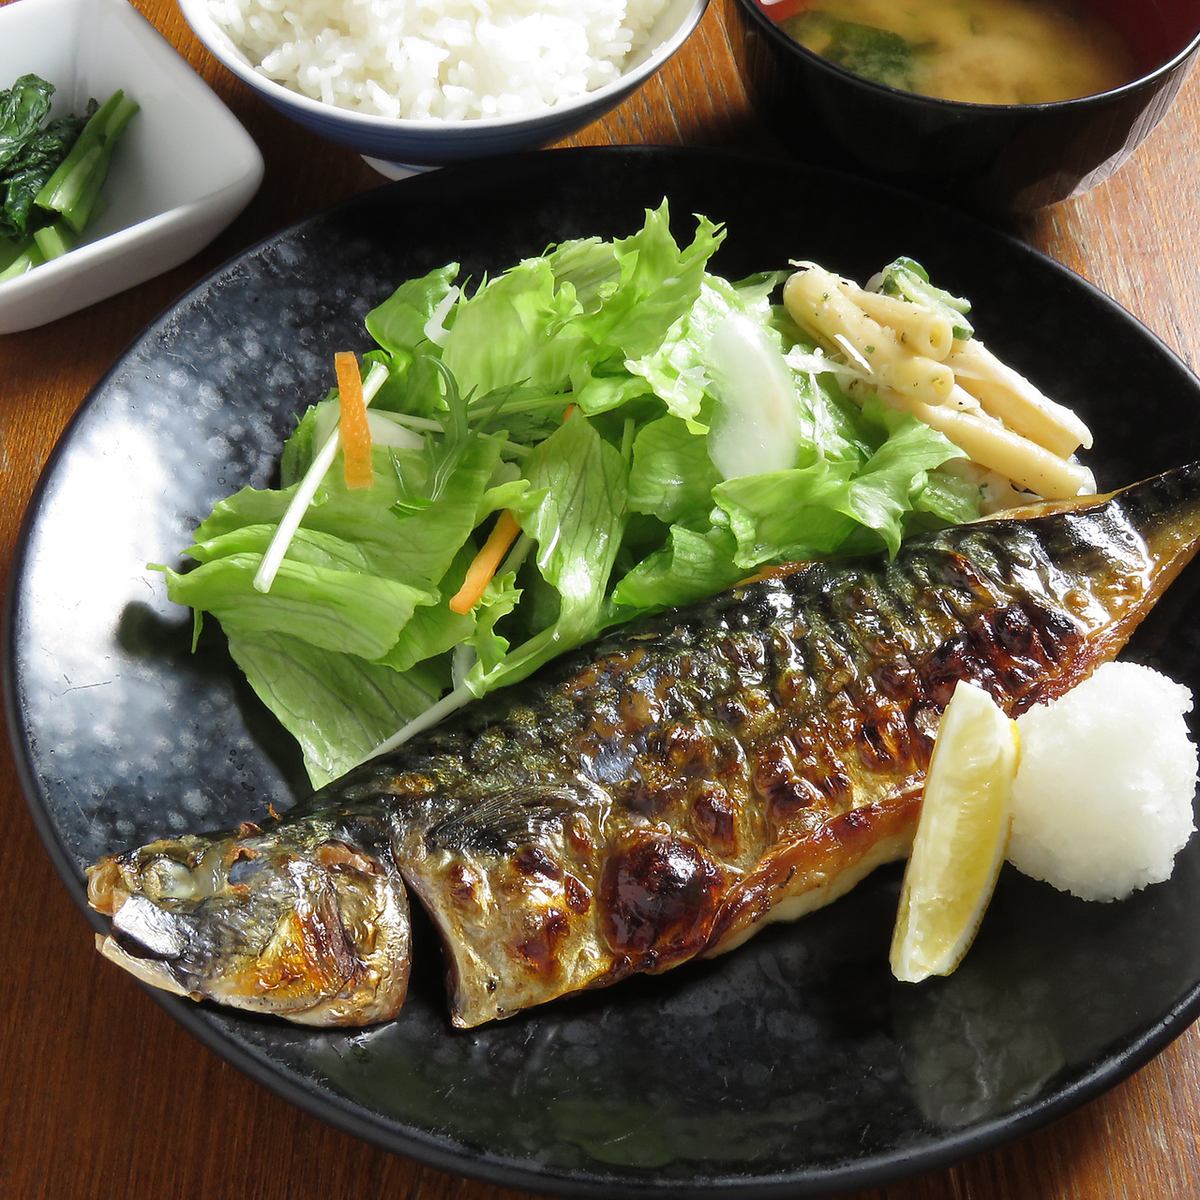 We also have a rich lunch menu that is recommended! Lunch drinks are also welcome♪